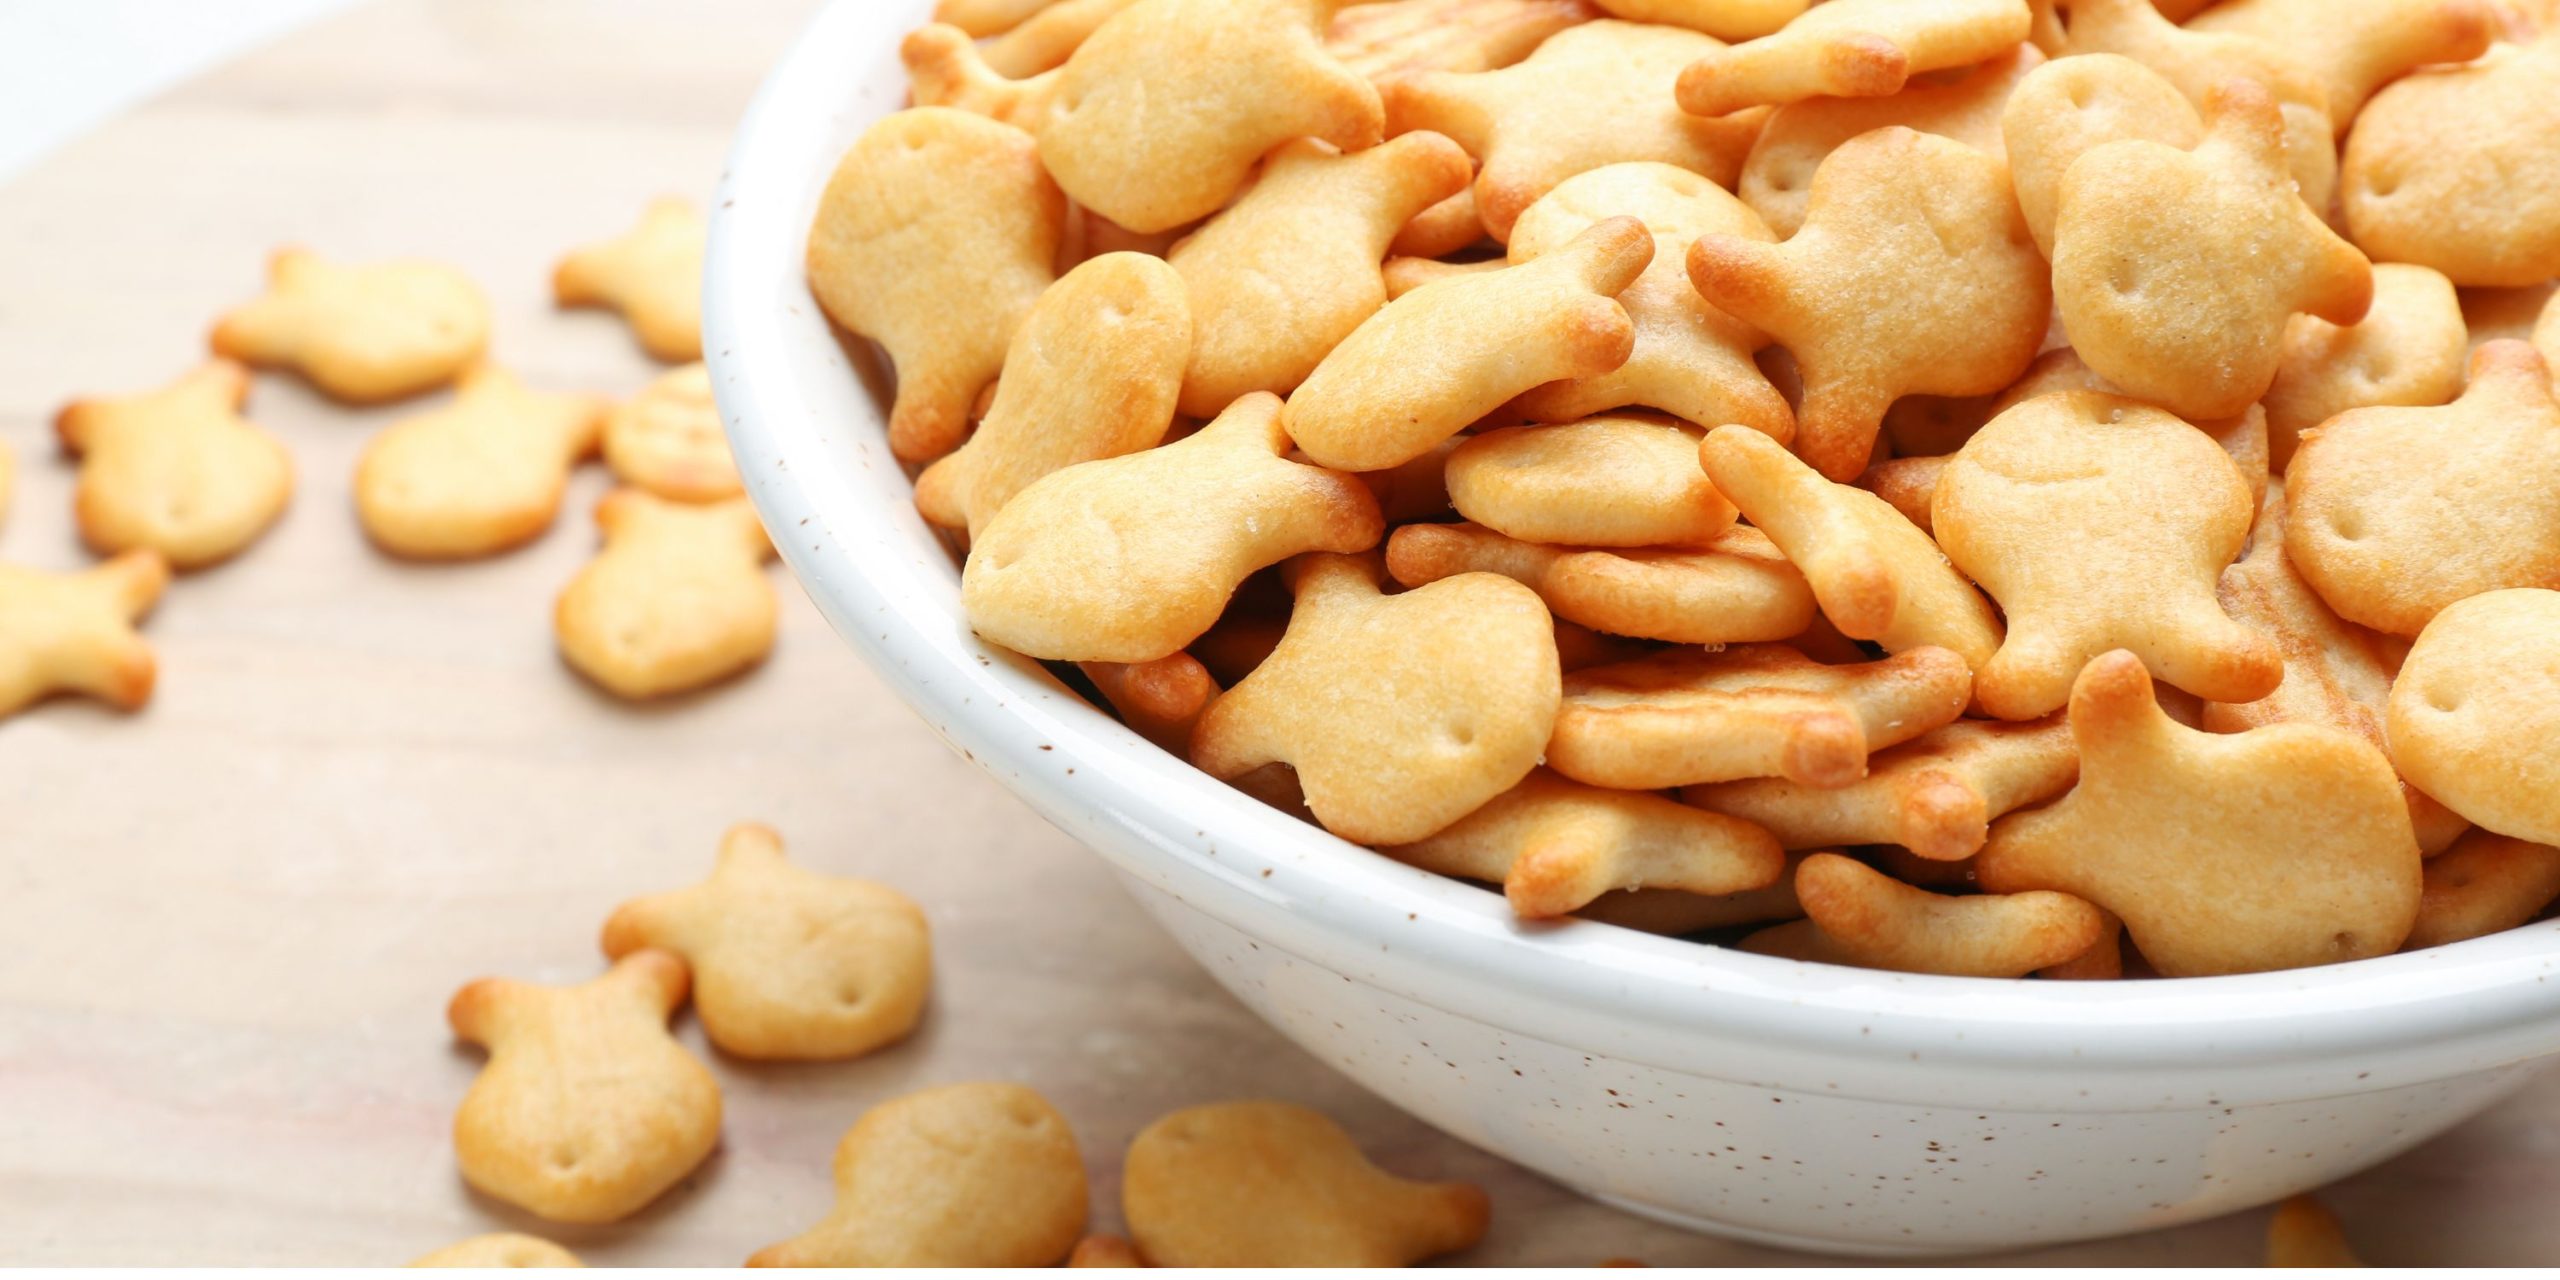 Can Cats Eat Goldfish Crackers – What Makes It Bad for Cats?